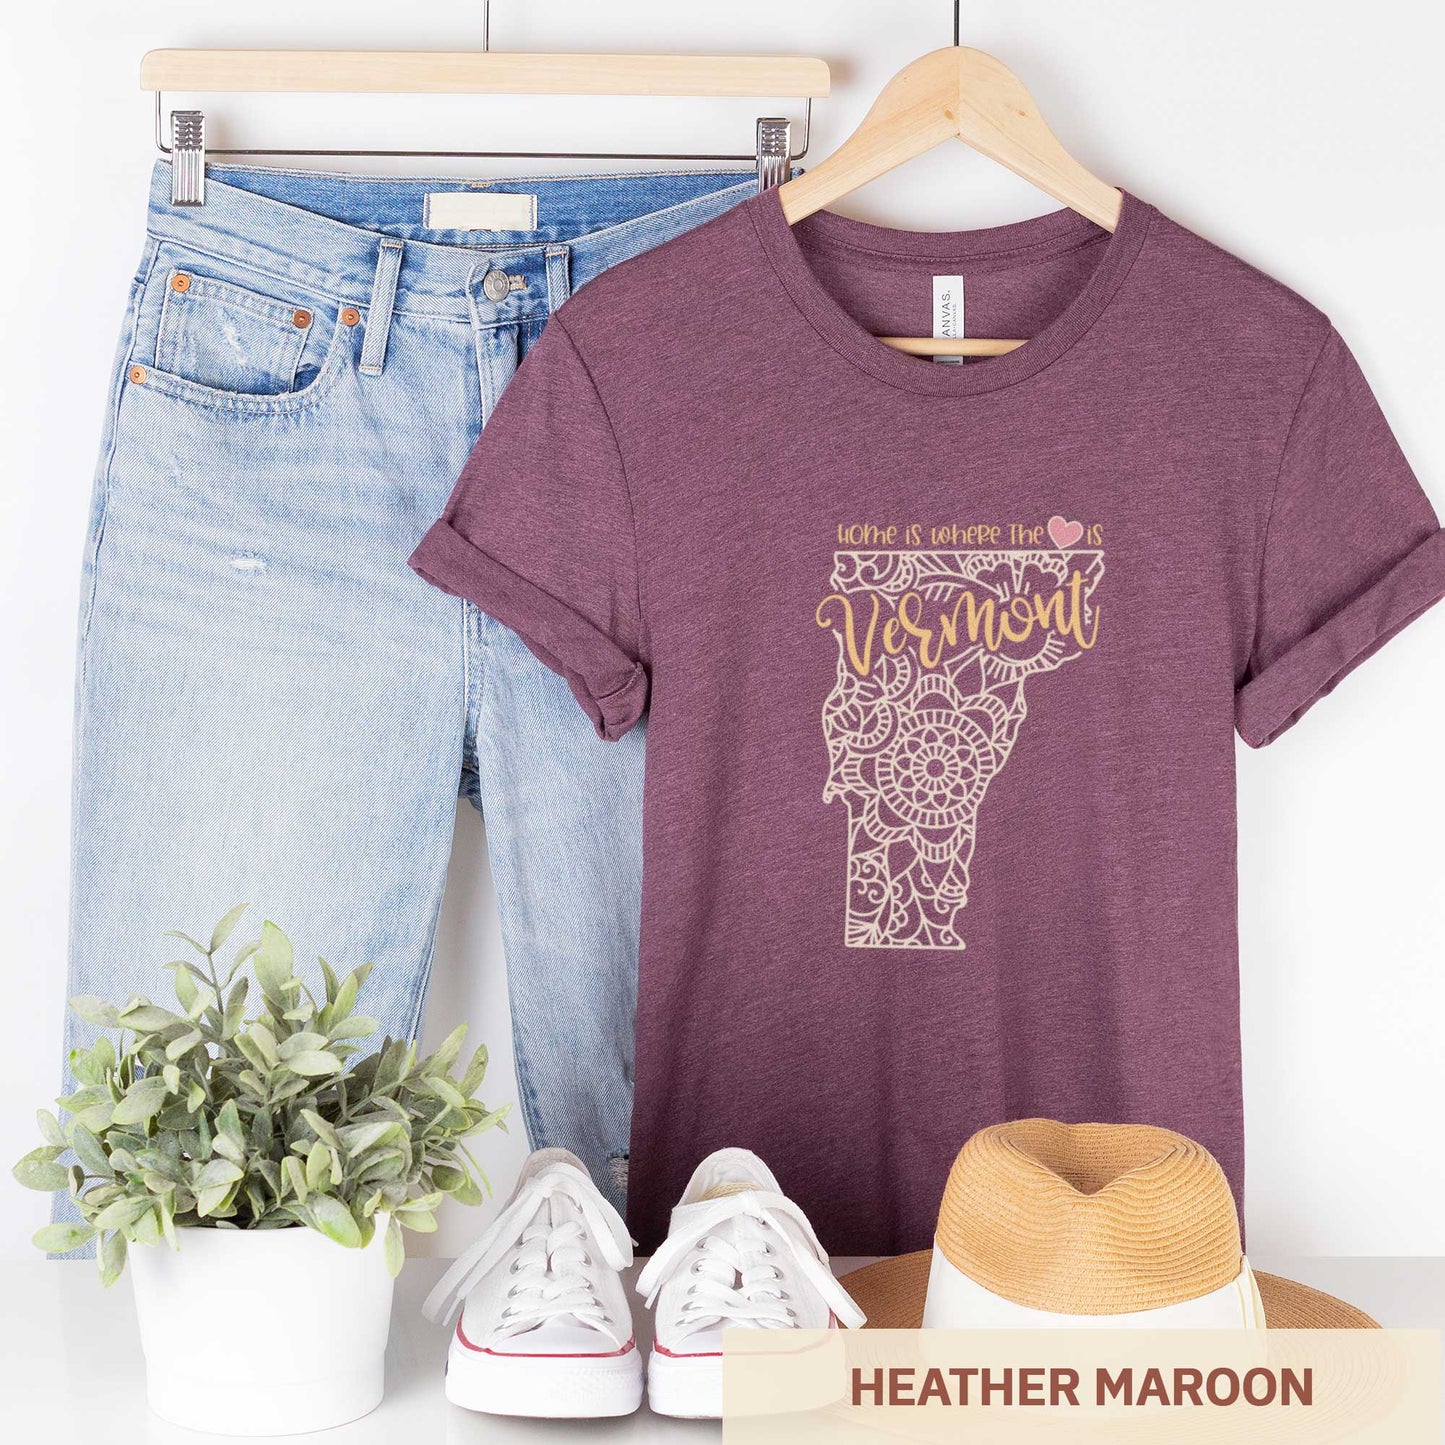 A hanging heather maroon Bella Canvas t-shirt featuring a mandala in the shape of Vermont with the words home is where the heart is.